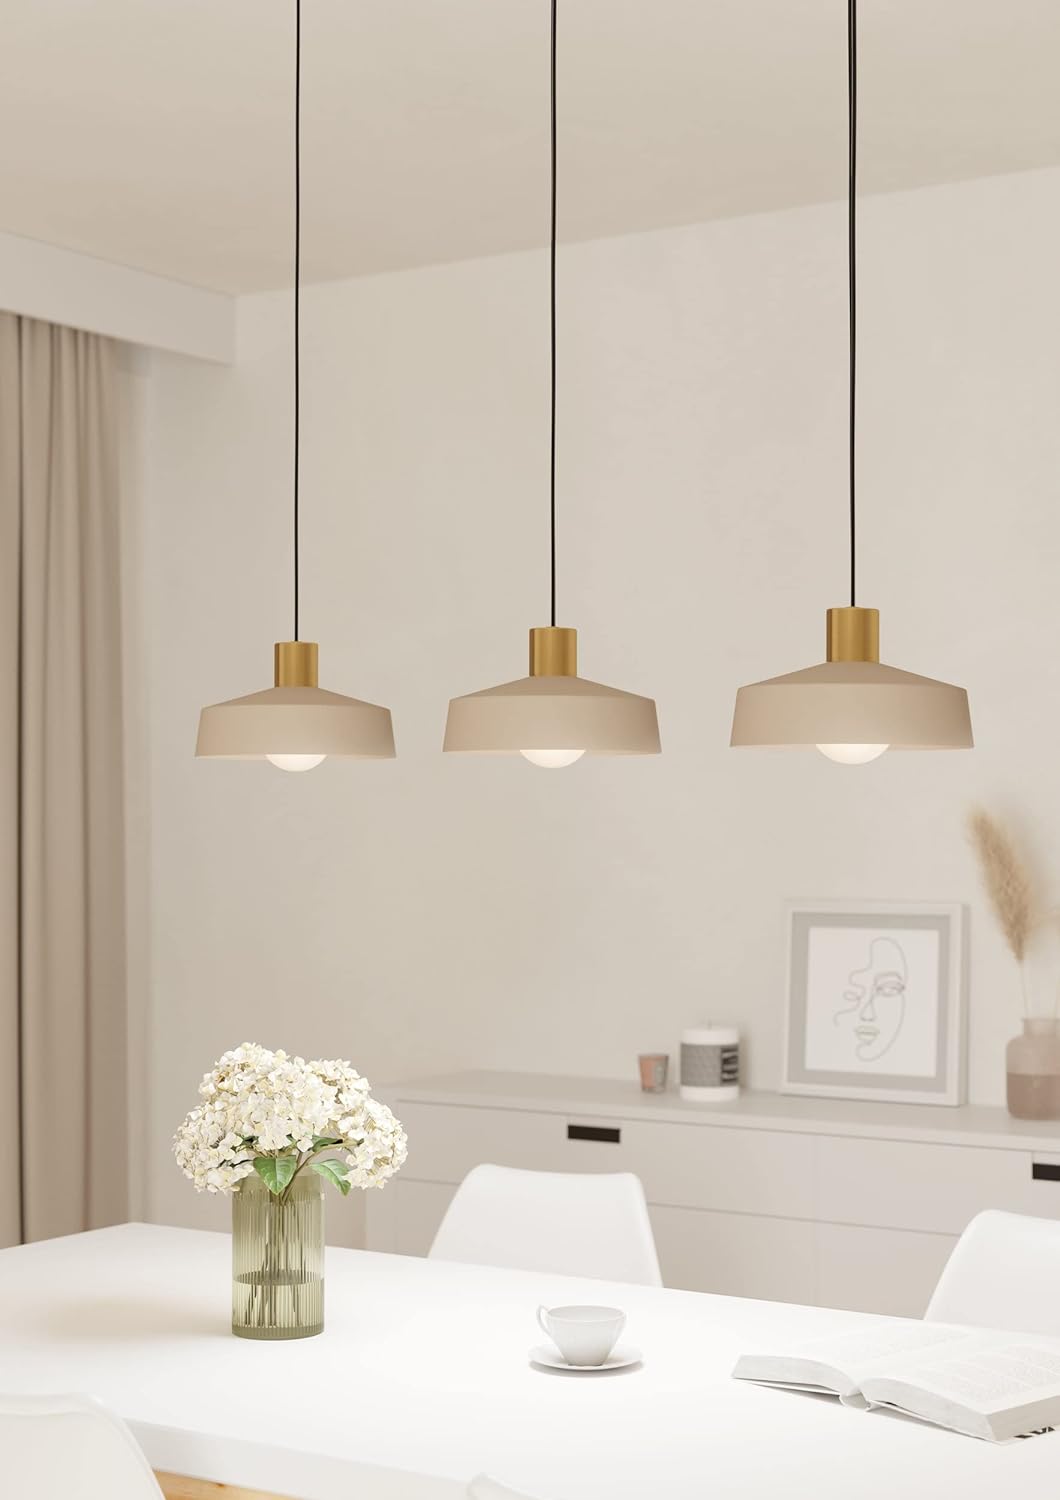 EGLO Pendant lighting Valdiola, 3 lamp ceiling light fitting, hanging lamp for dining and living room made of metal in sand colour and brushed brass finish, E27 socket